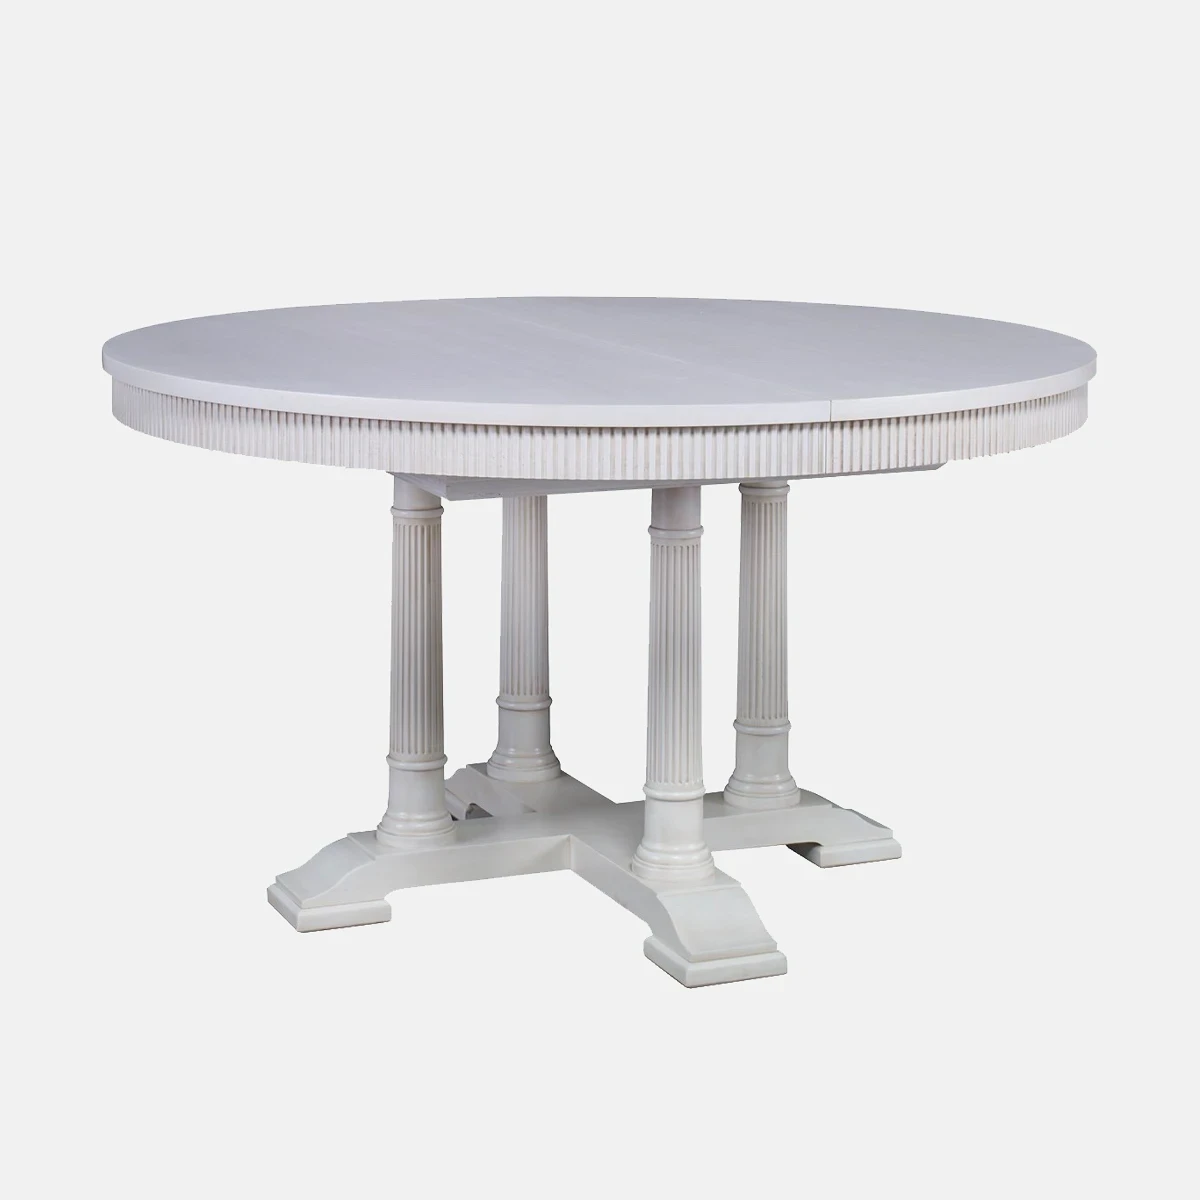 a white table with columns and a round table top